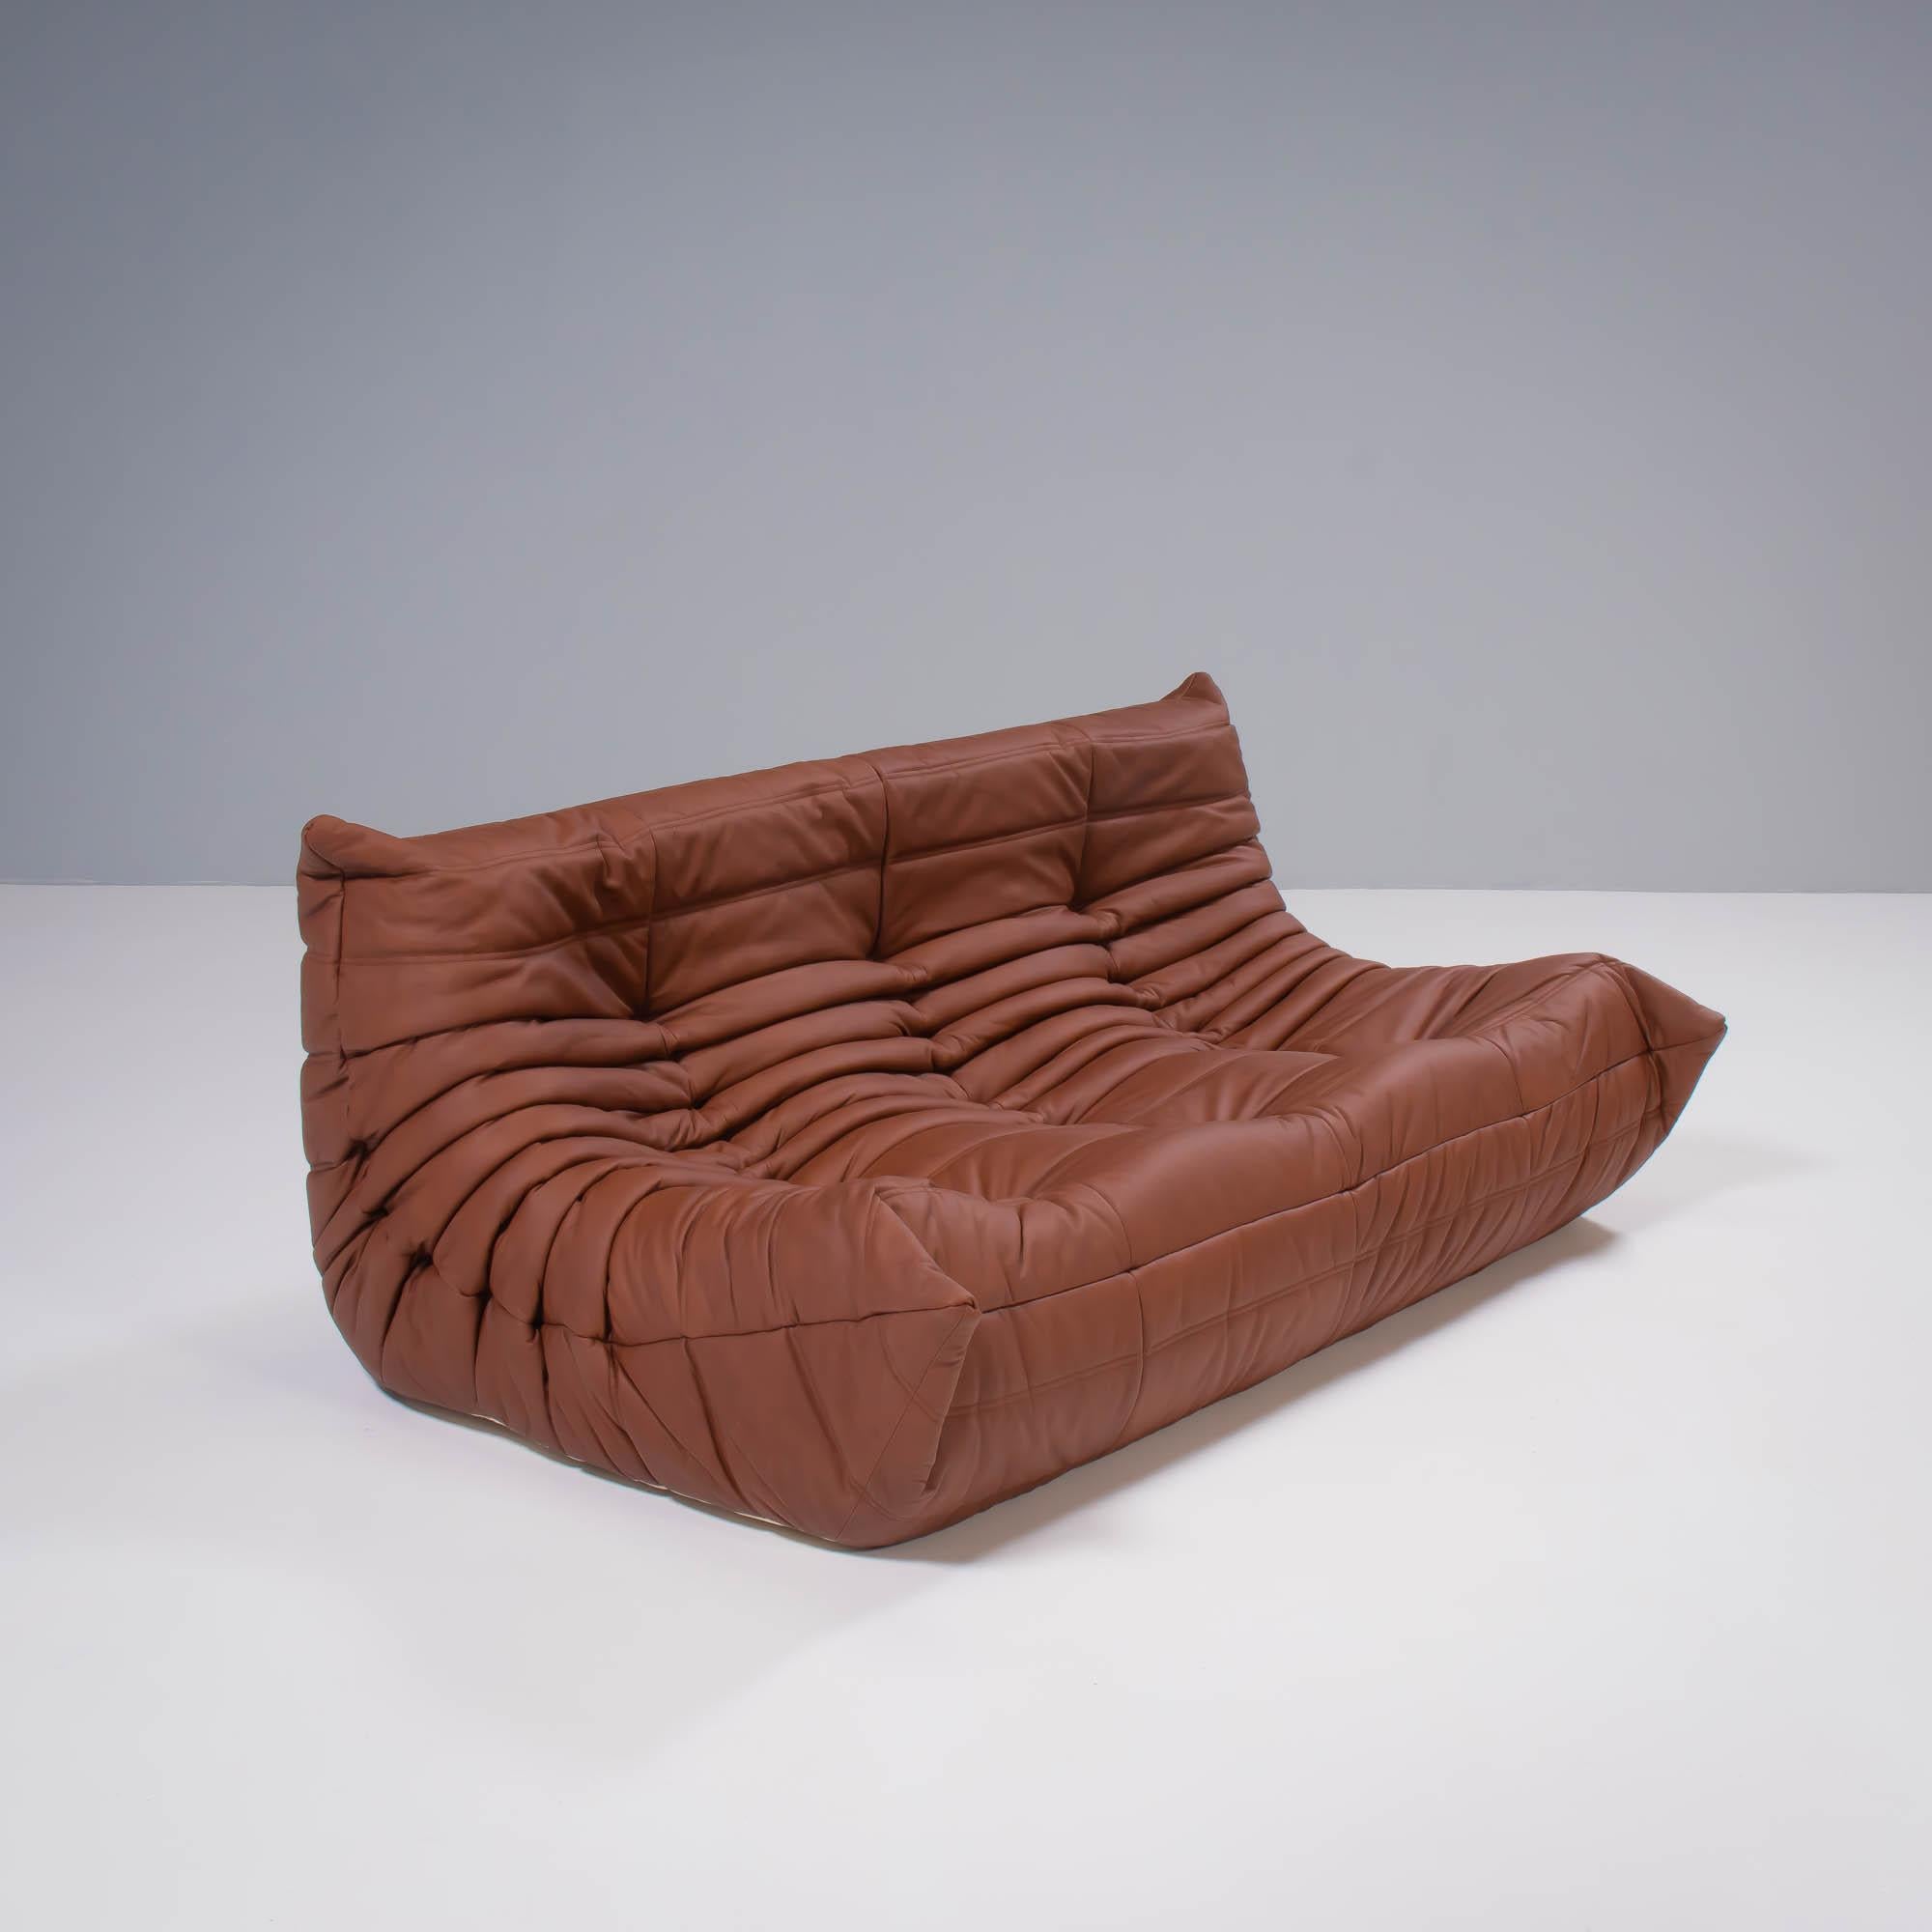 Ligne Roset by Michel Ducaroy Togo Brown Leather Modular Sofa, Set of 5 In Excellent Condition For Sale In London, GB